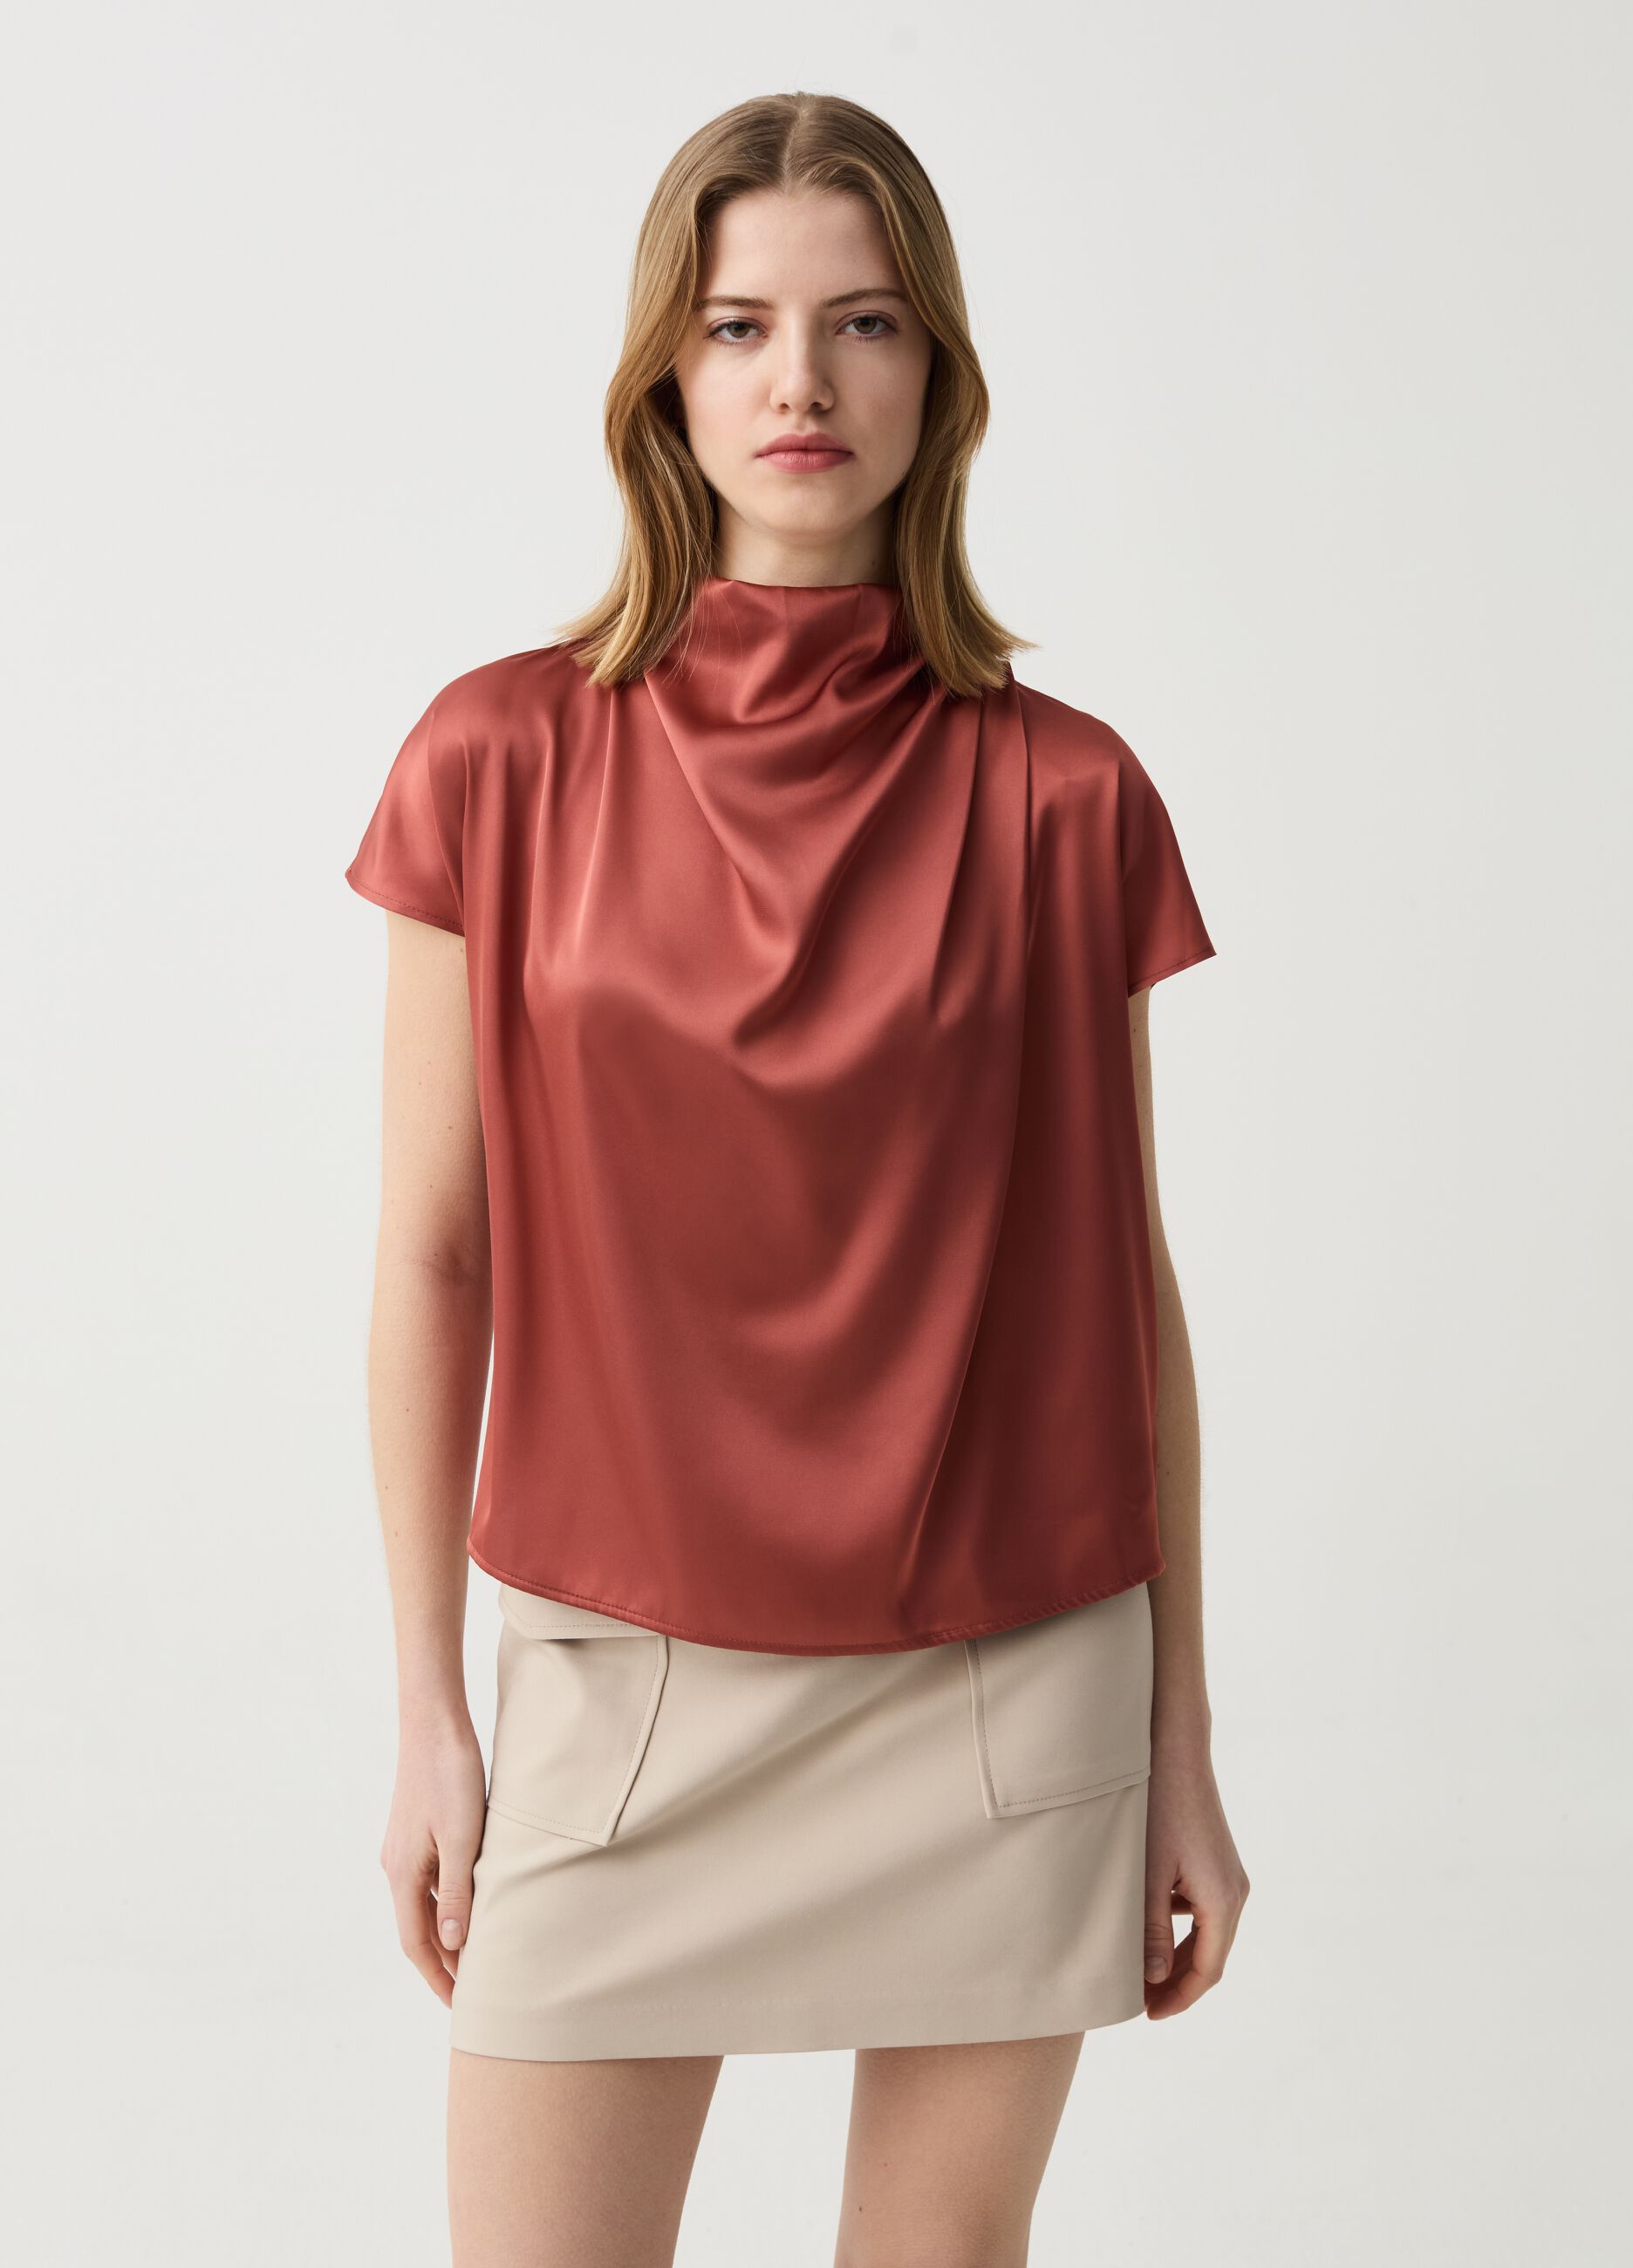 Satin blouse with high neck and draping